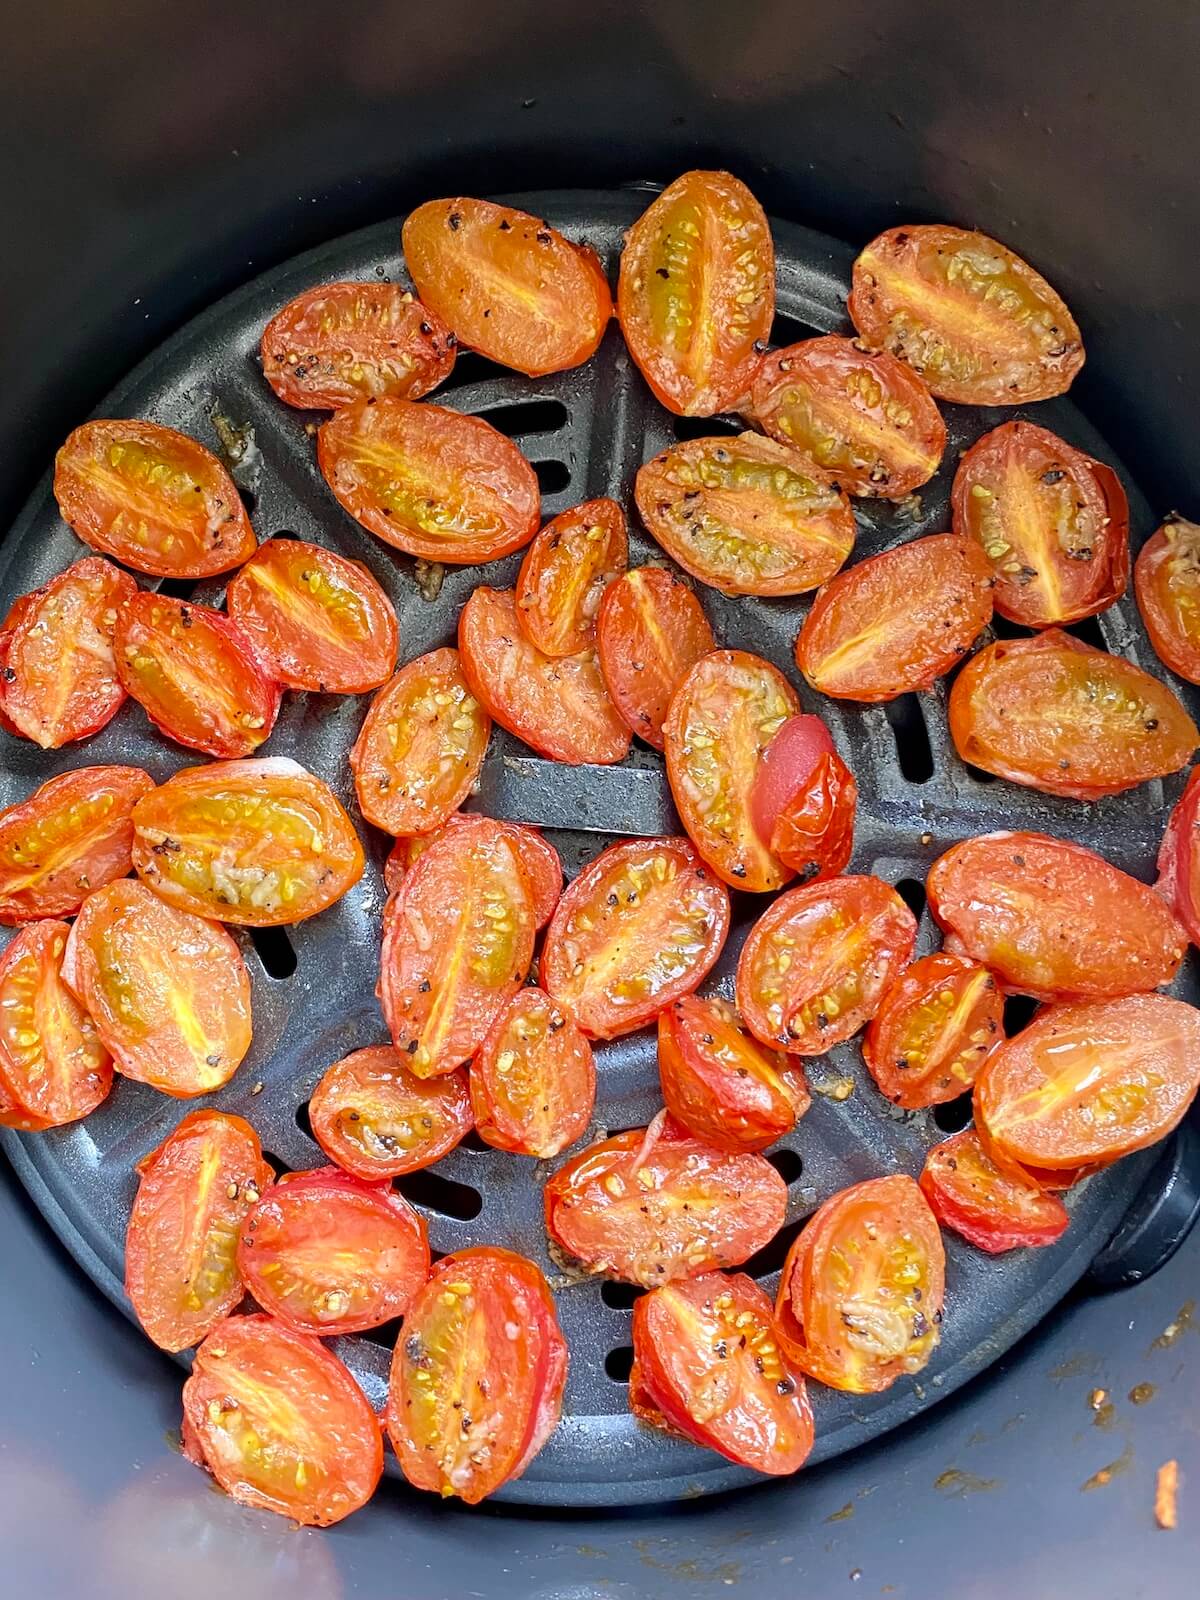 An air fryer basket with finished roasted cherry tomatoes inside.